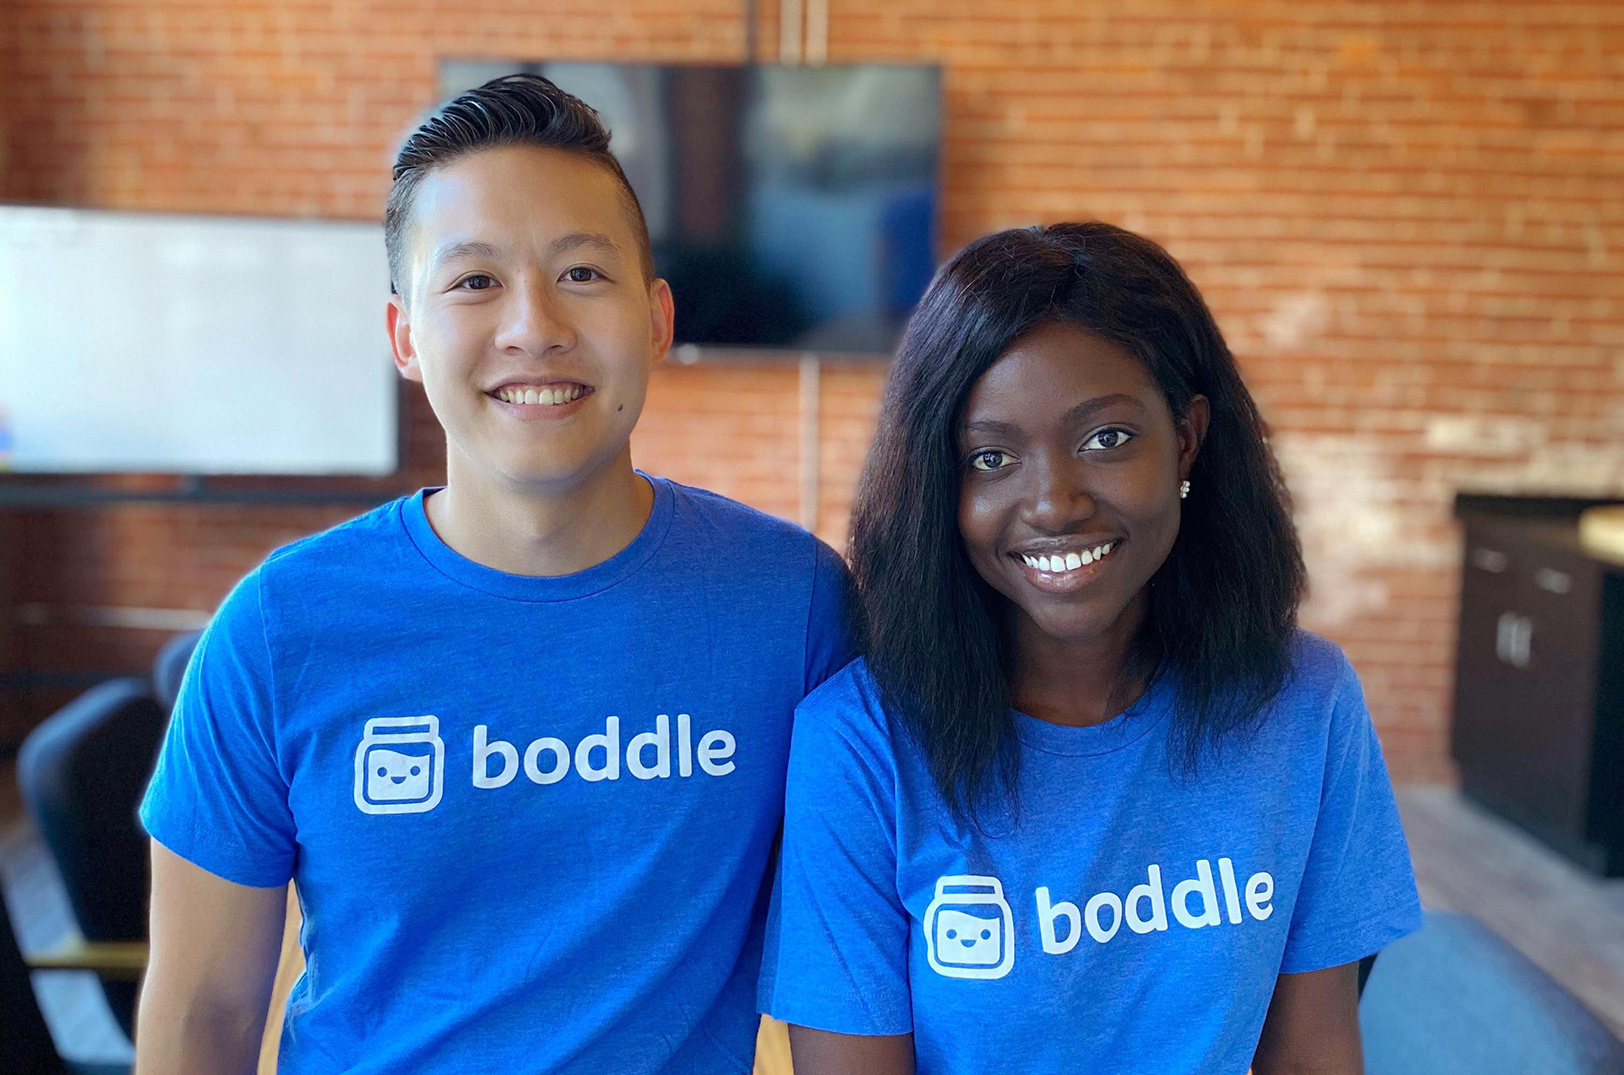 Boddle’s new $350K investment comes with a catch: KC startup relocating to Tulsa